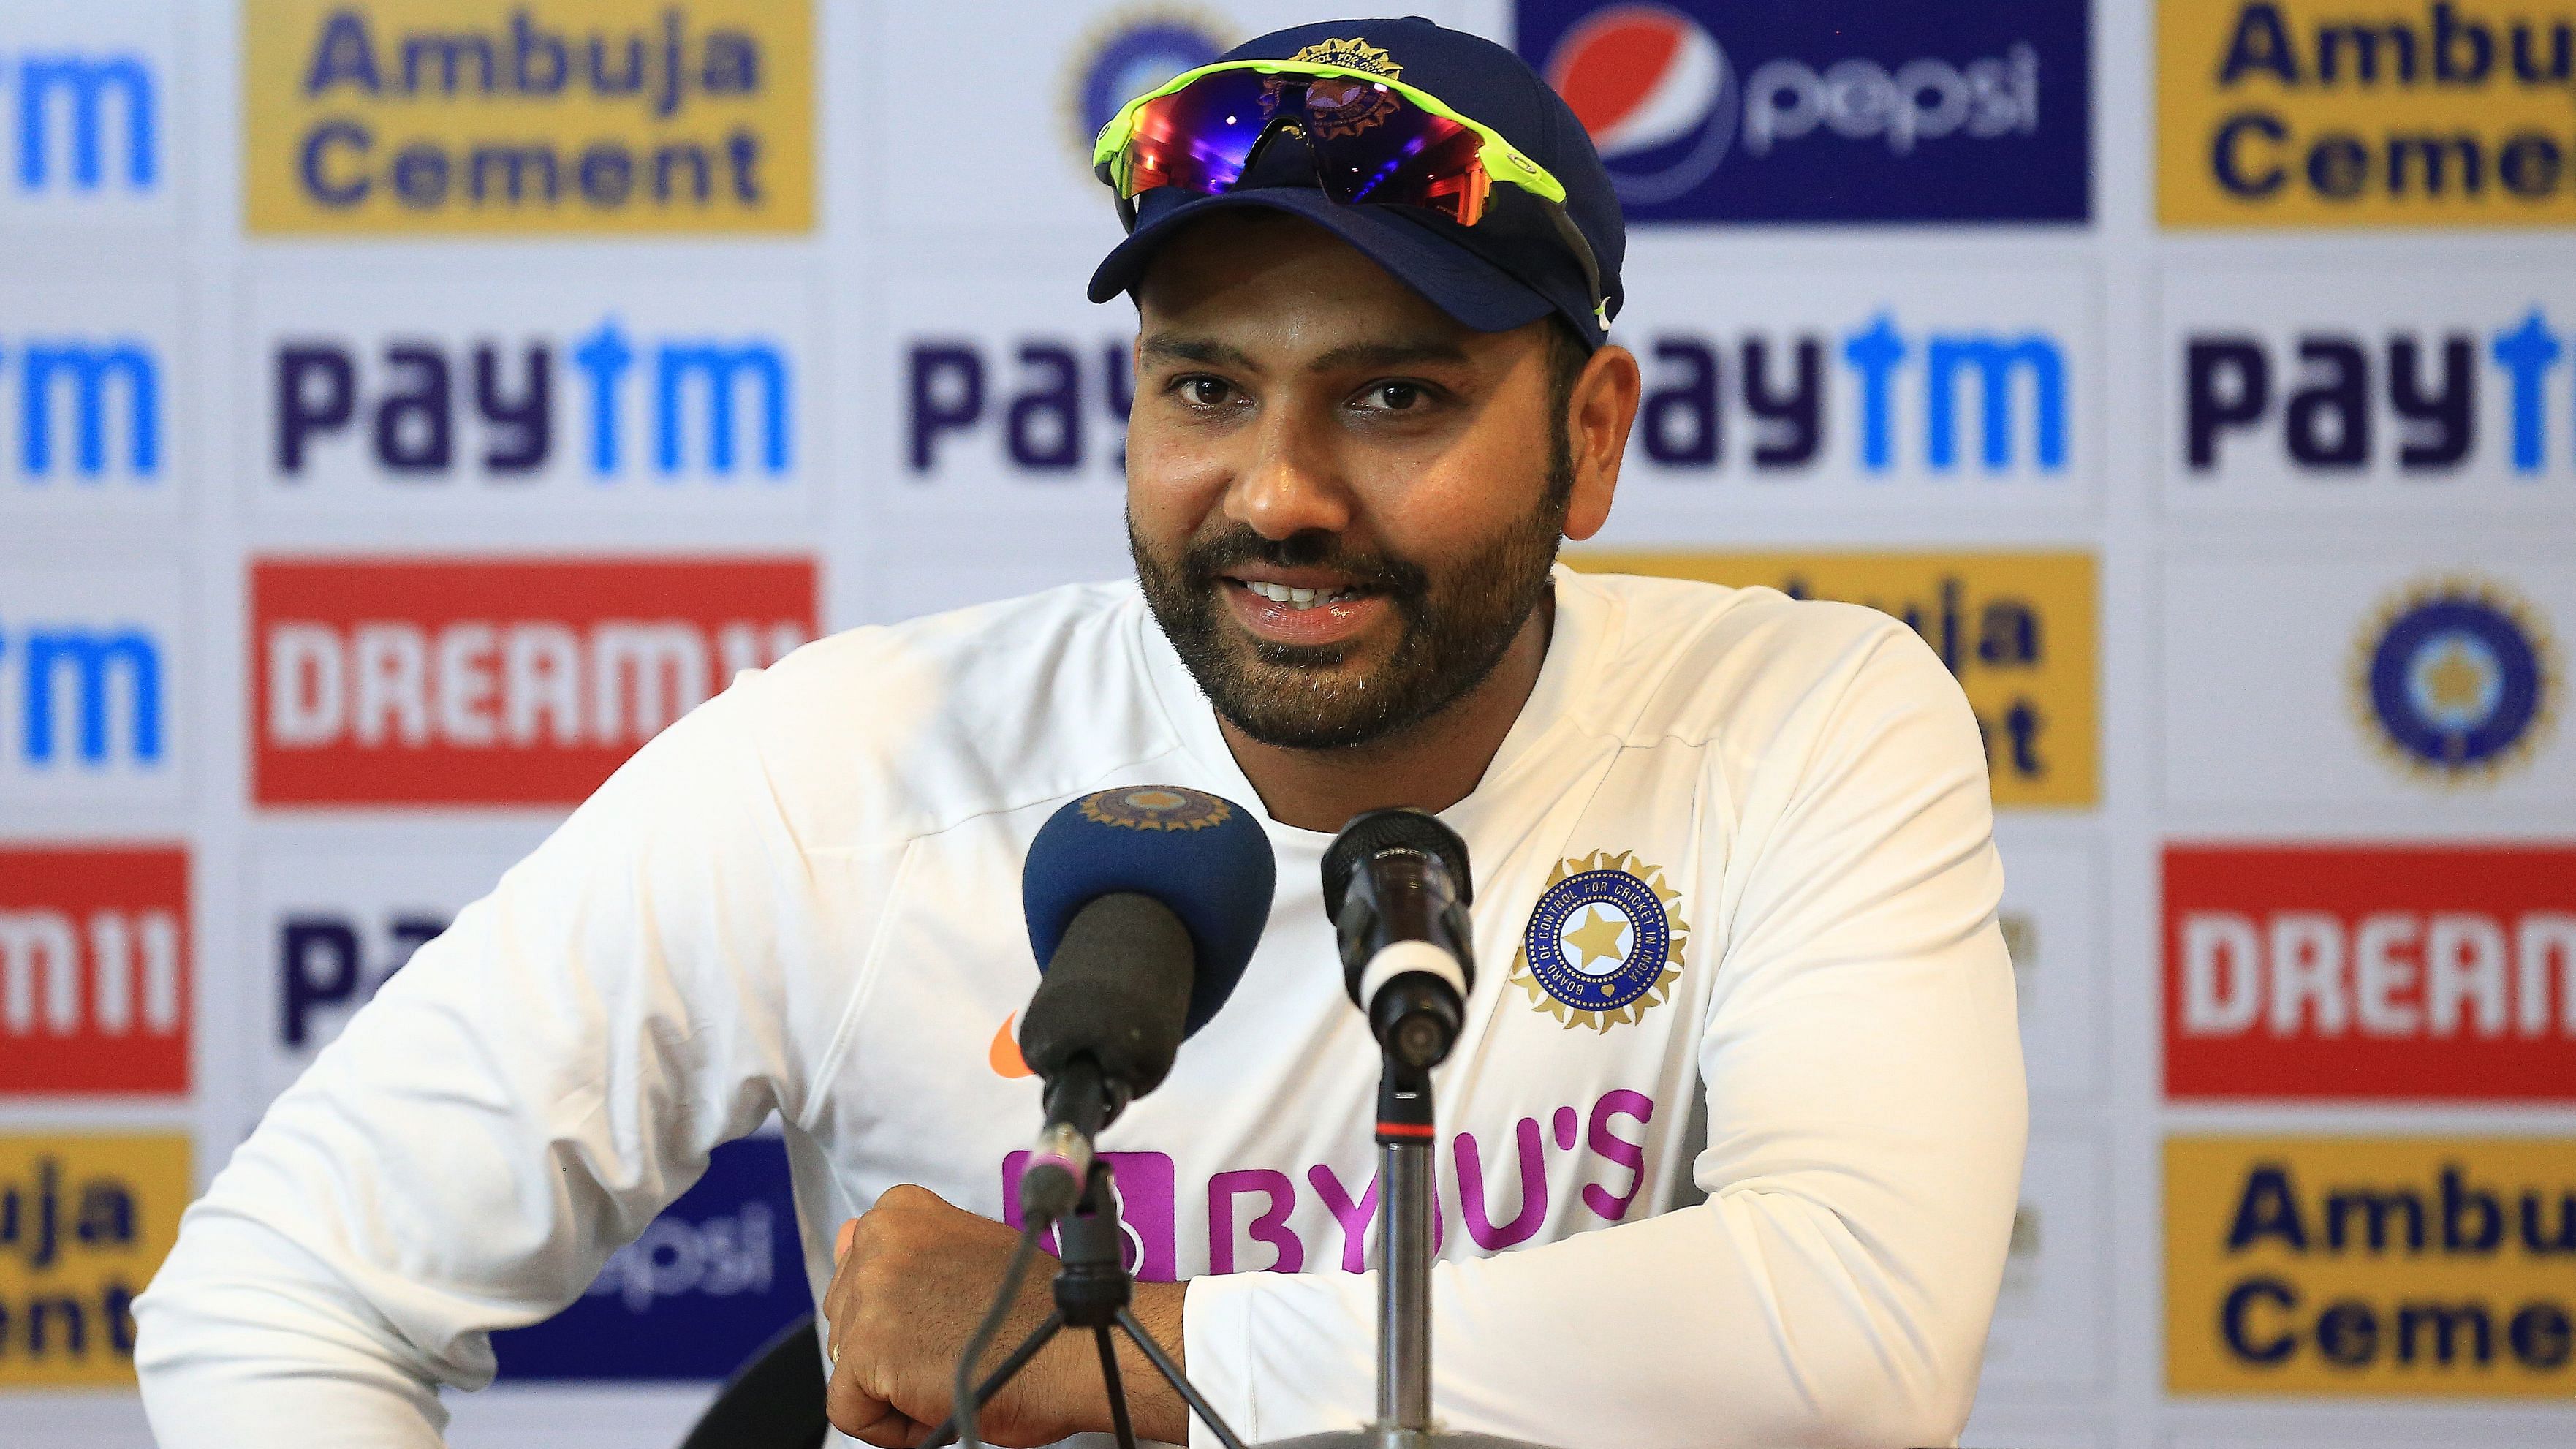 WATCH: Rohit Sharma comes up with witty response when asked why he enjoys  press conferences